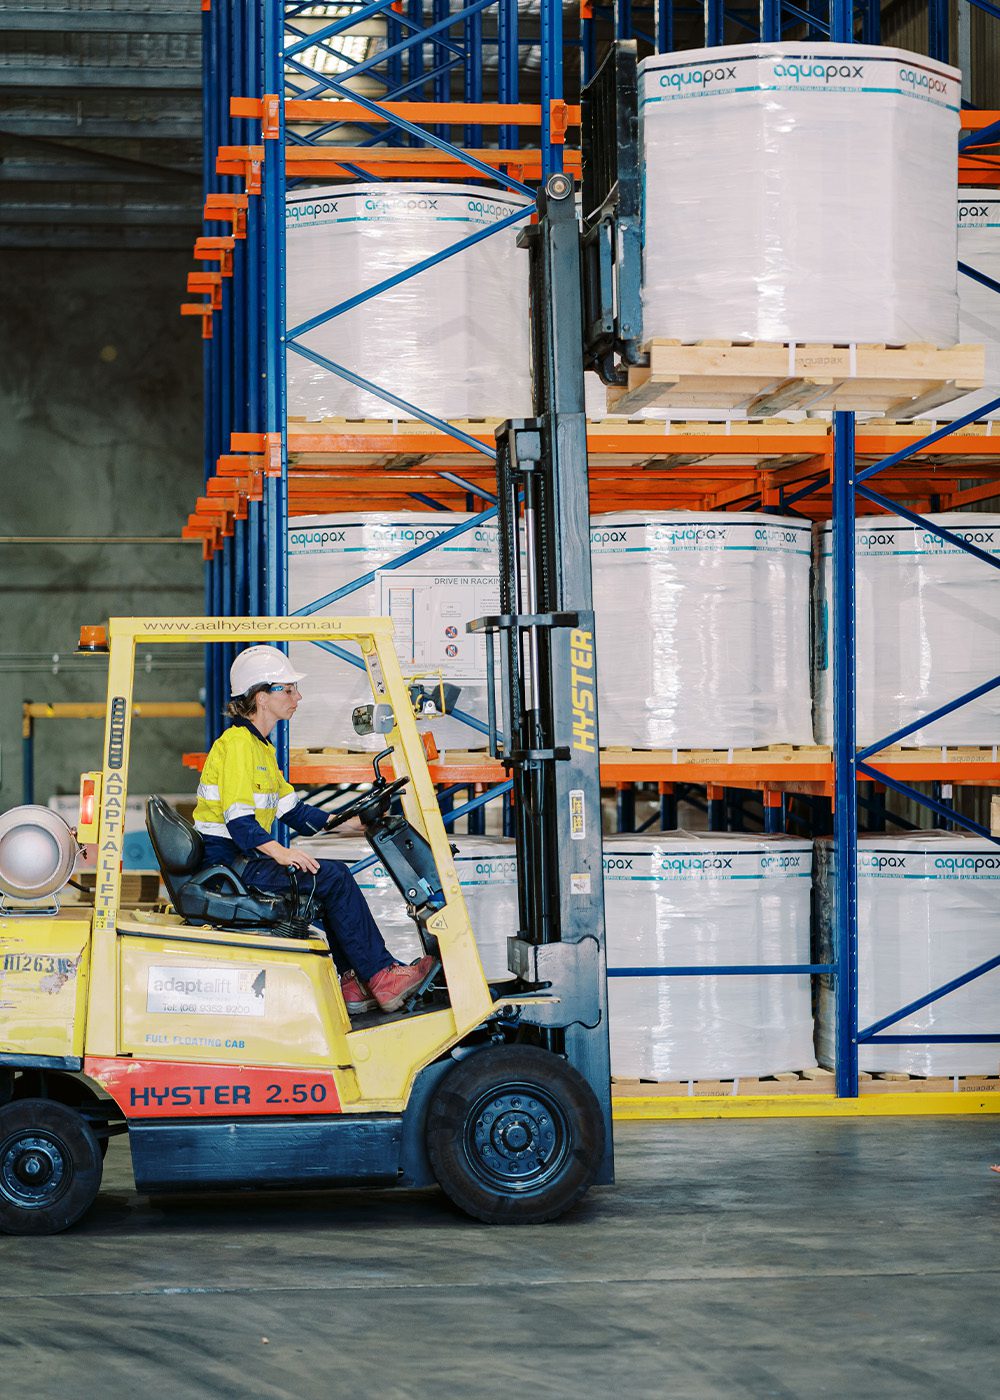 Woman driving forklift in warehouse filled with water pods